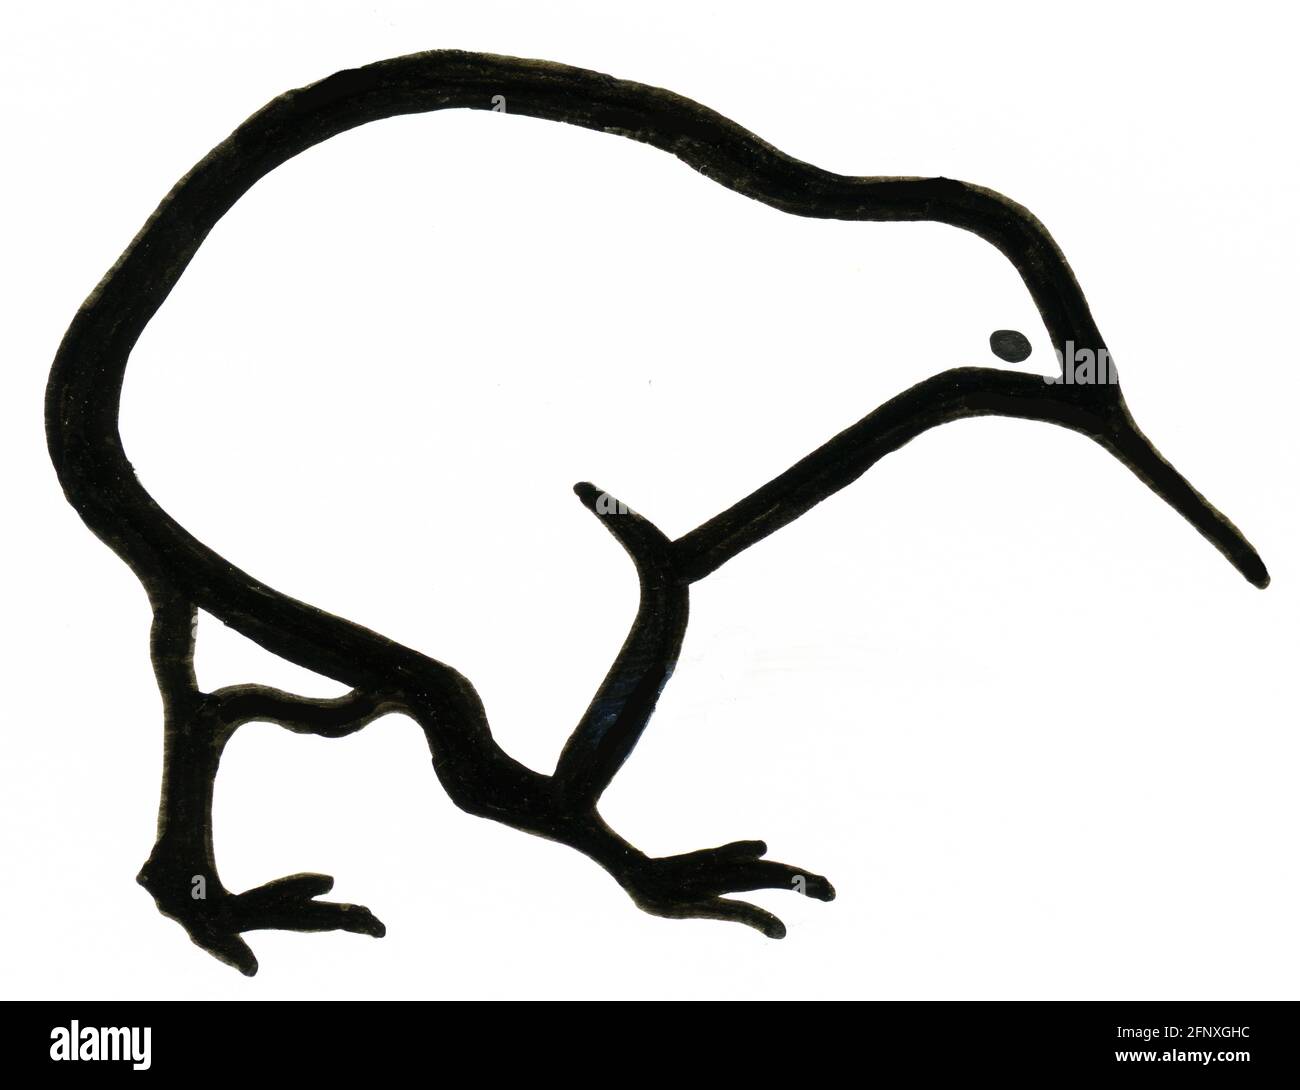 A cartoon style drawing of a New Zealand kiwi suitable as a logo or stylised emblem of New Zealand Stock Photo